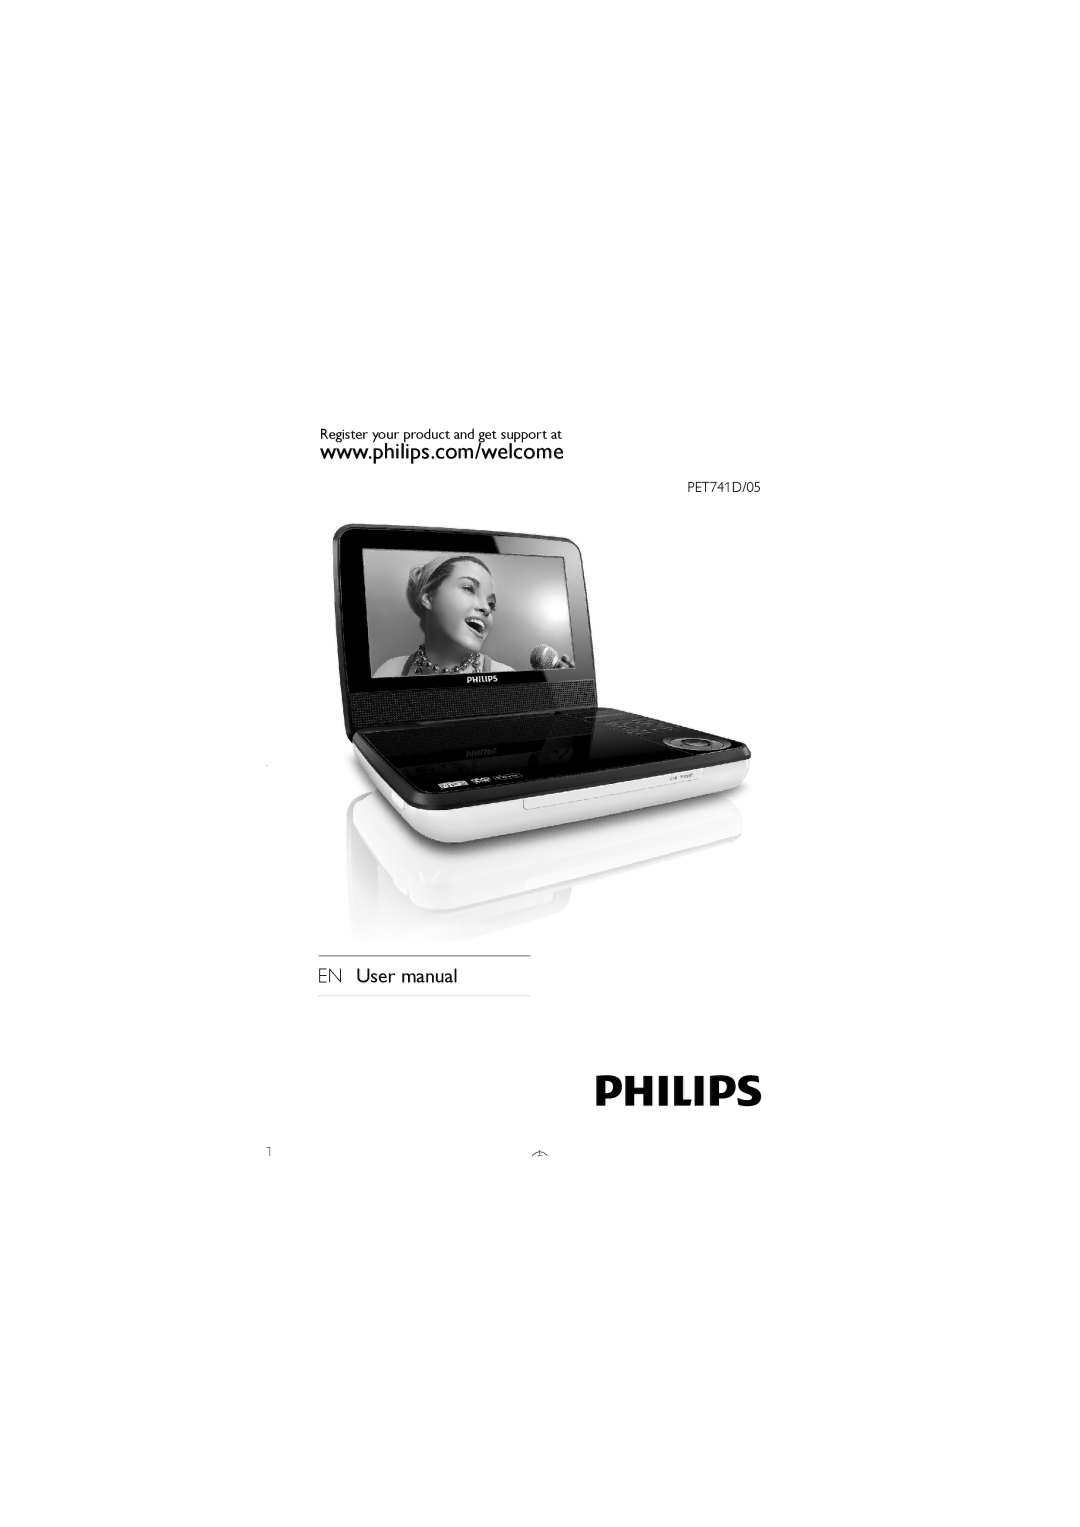 Philips user manual Register your product and get support at PET741D/05 